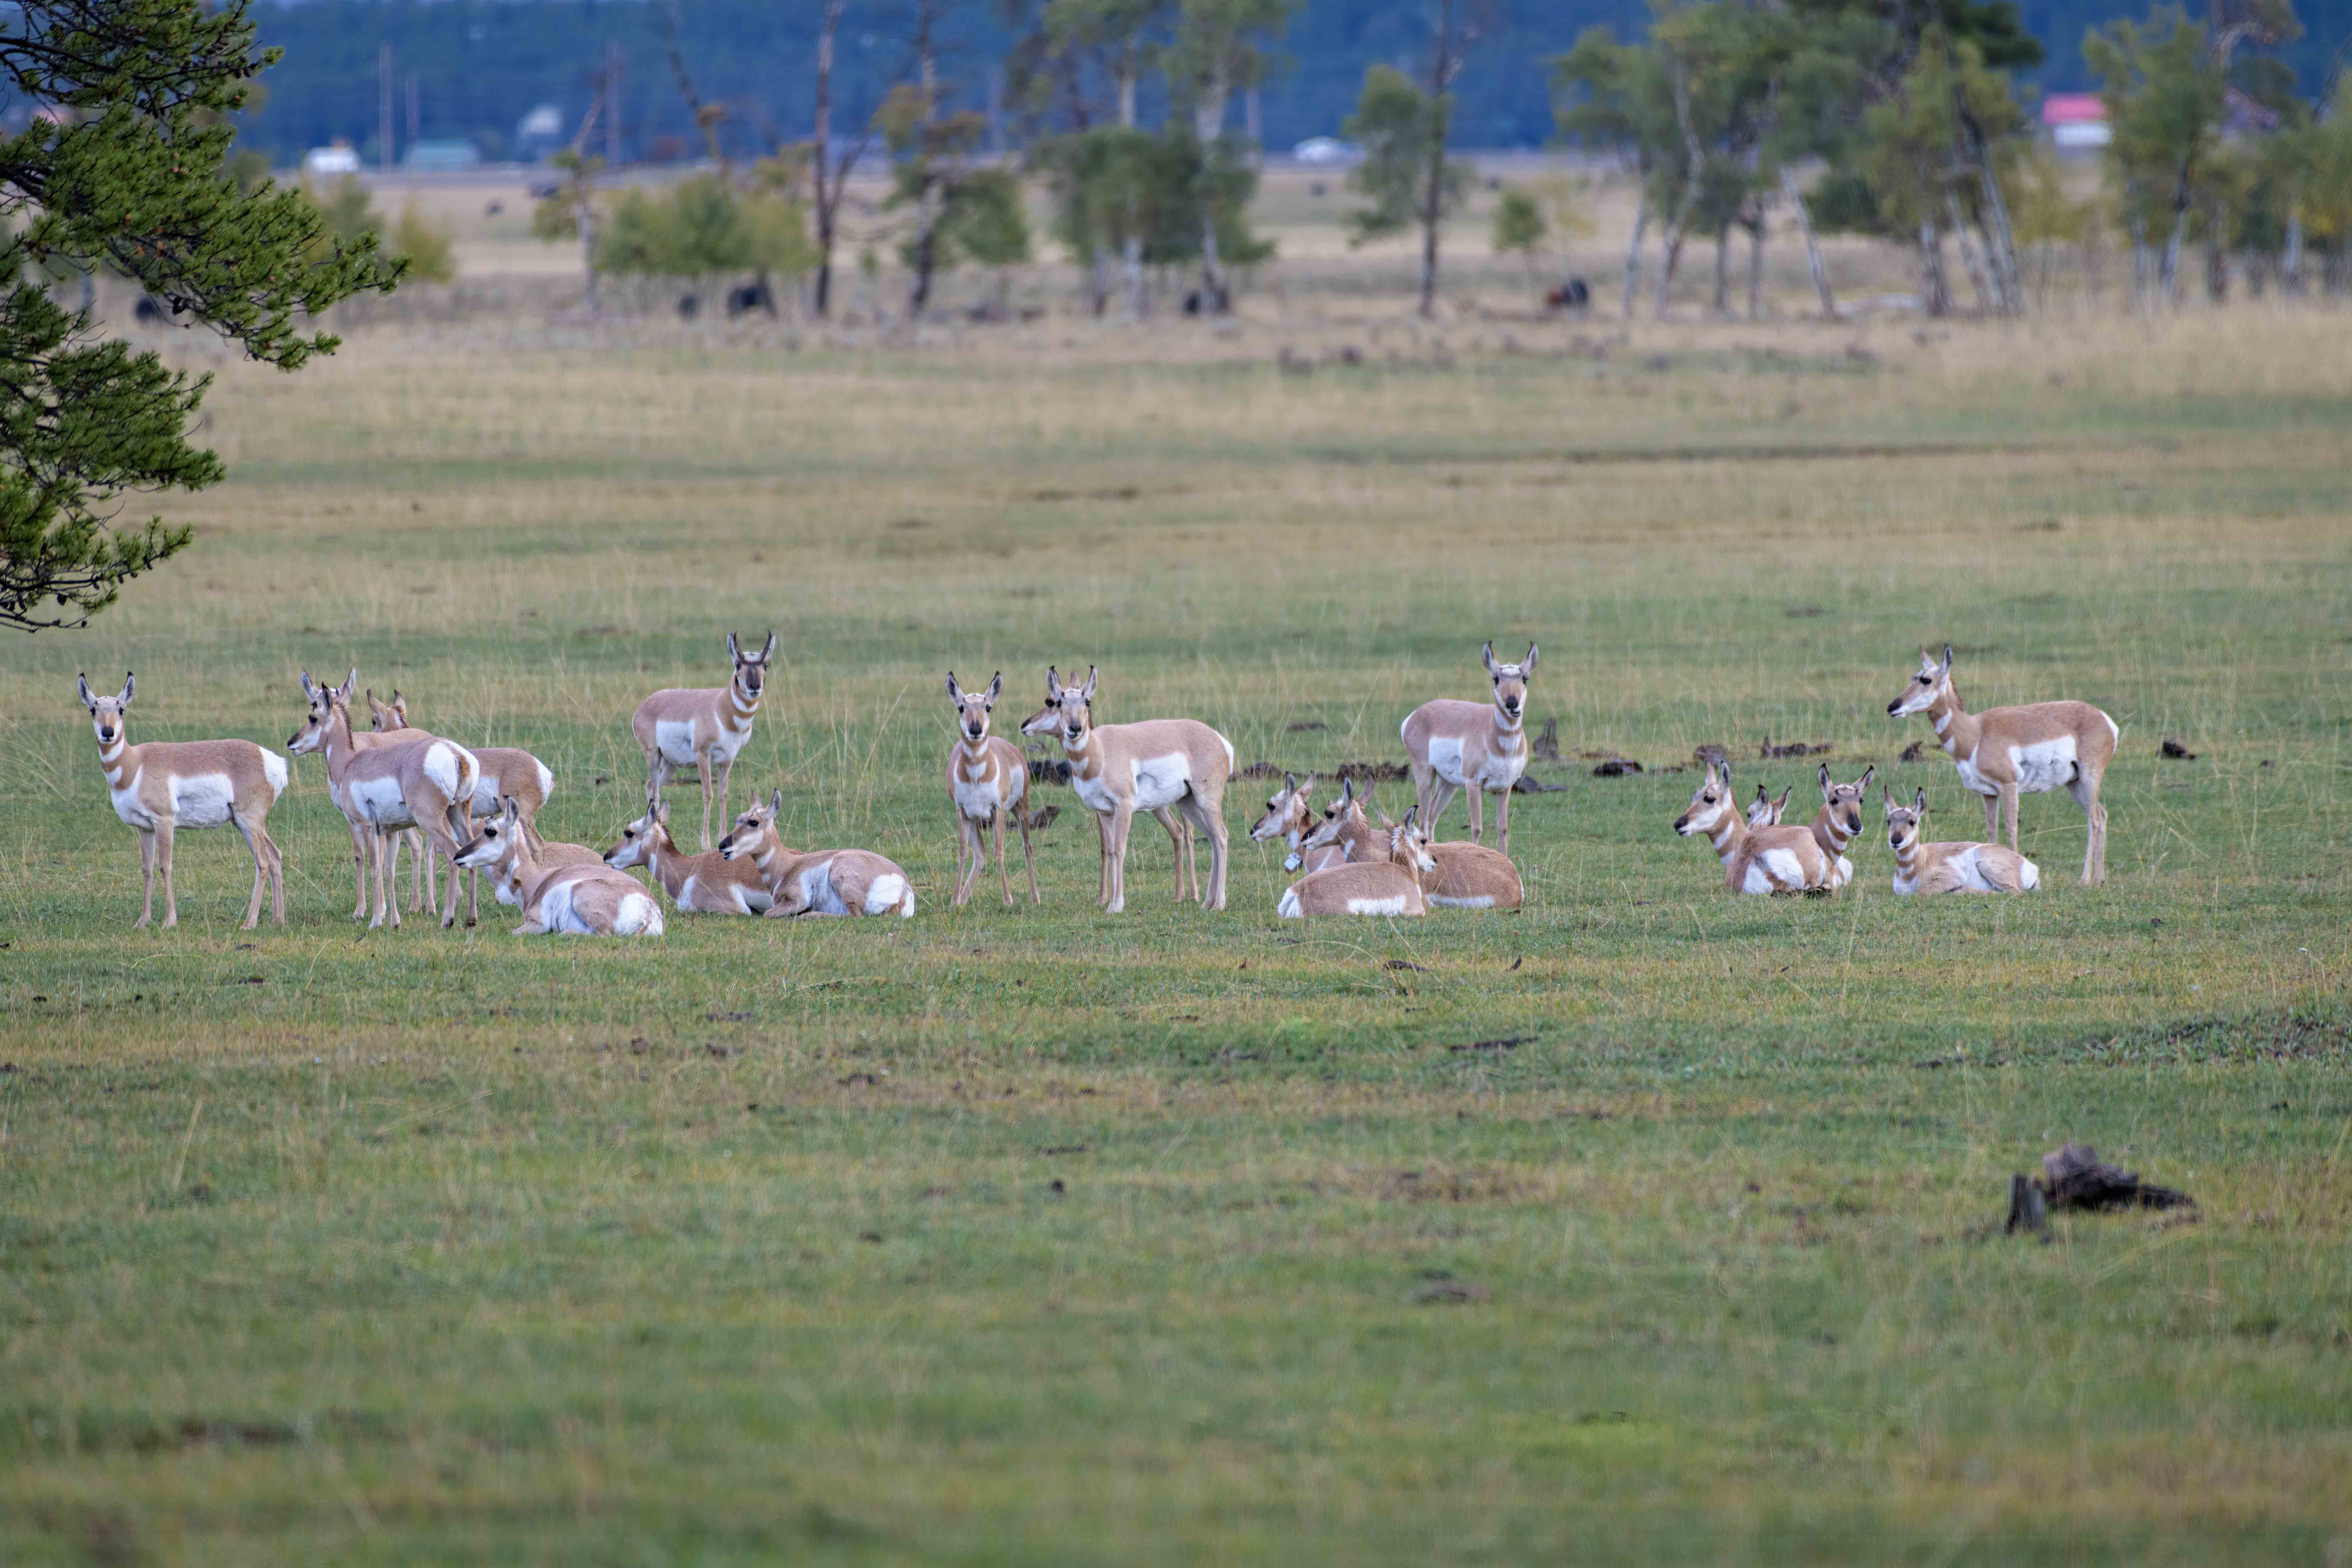 A large herd of pronghorn relax in a field of green grass; some are standing, while others are lying down.